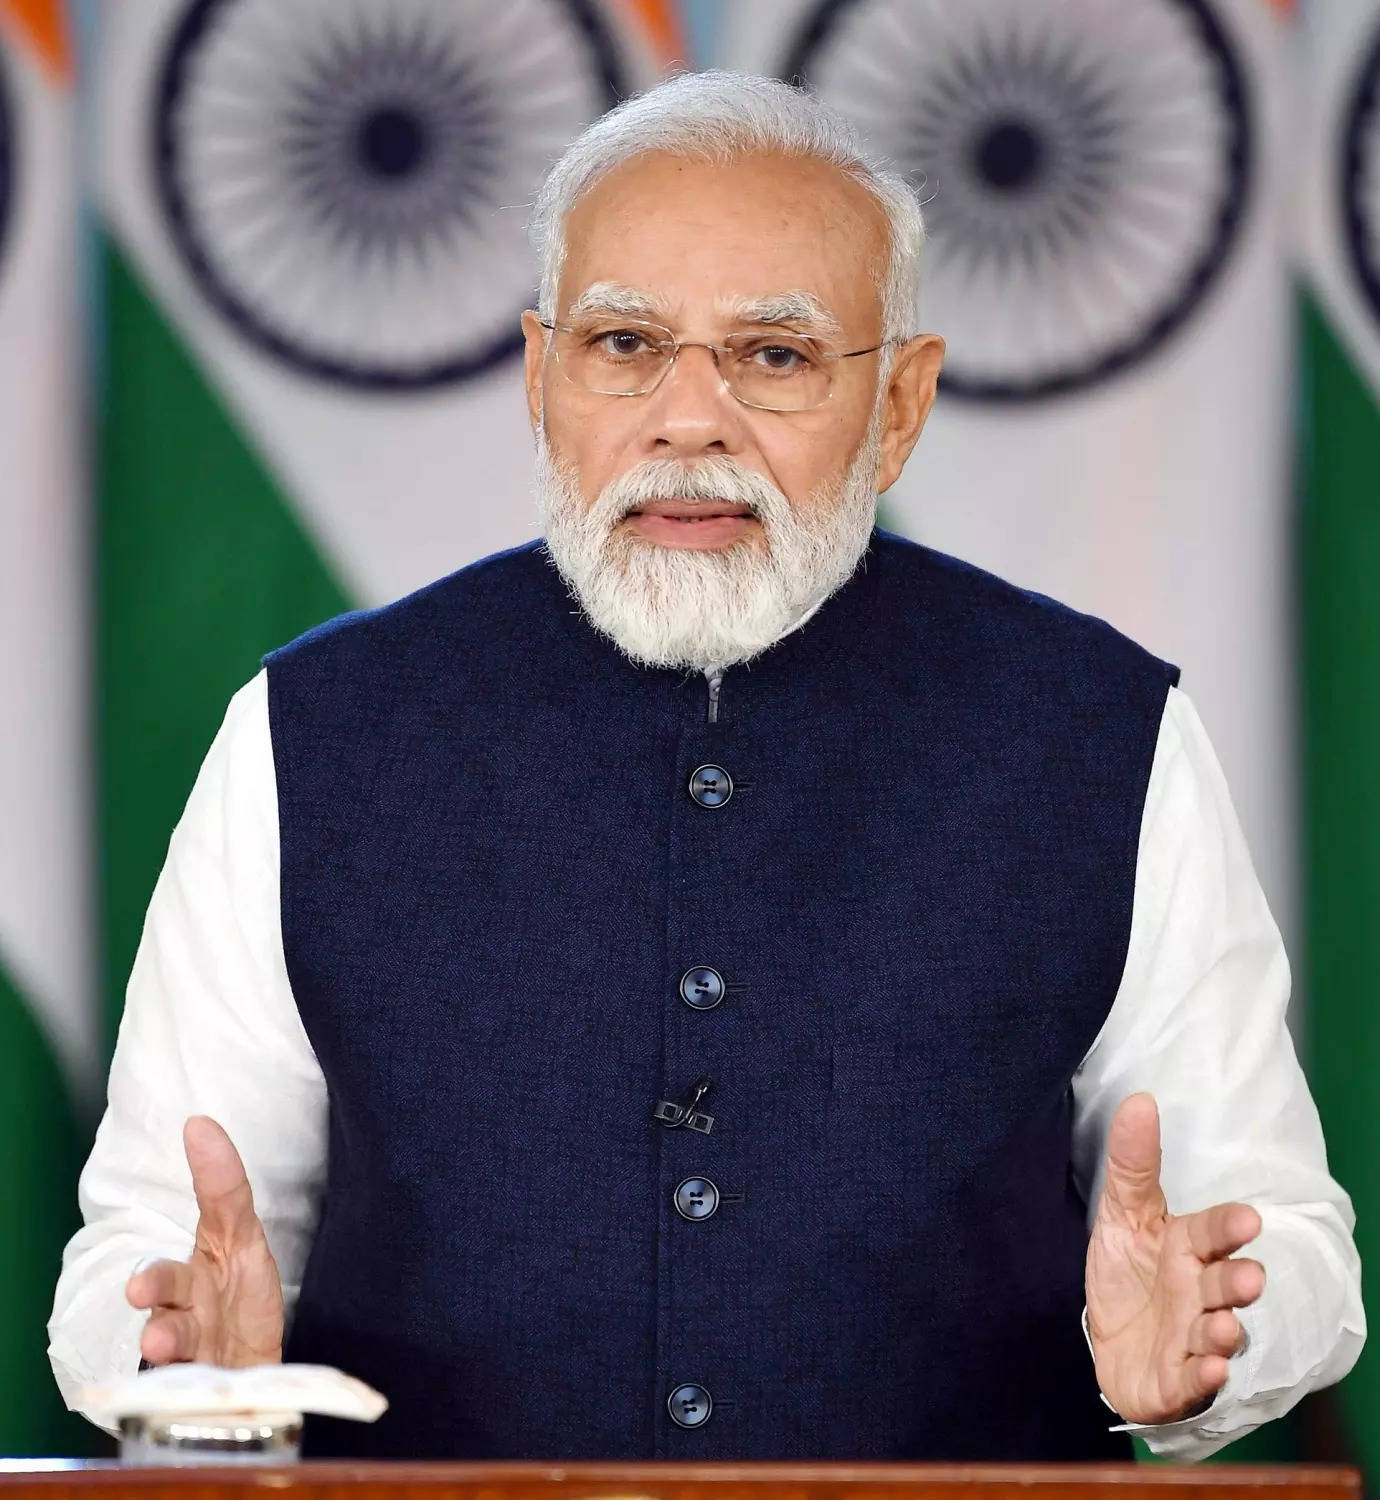 PM Modi to visit Gujarat on June 17 for two days launch projects worth Rs 21000 crore